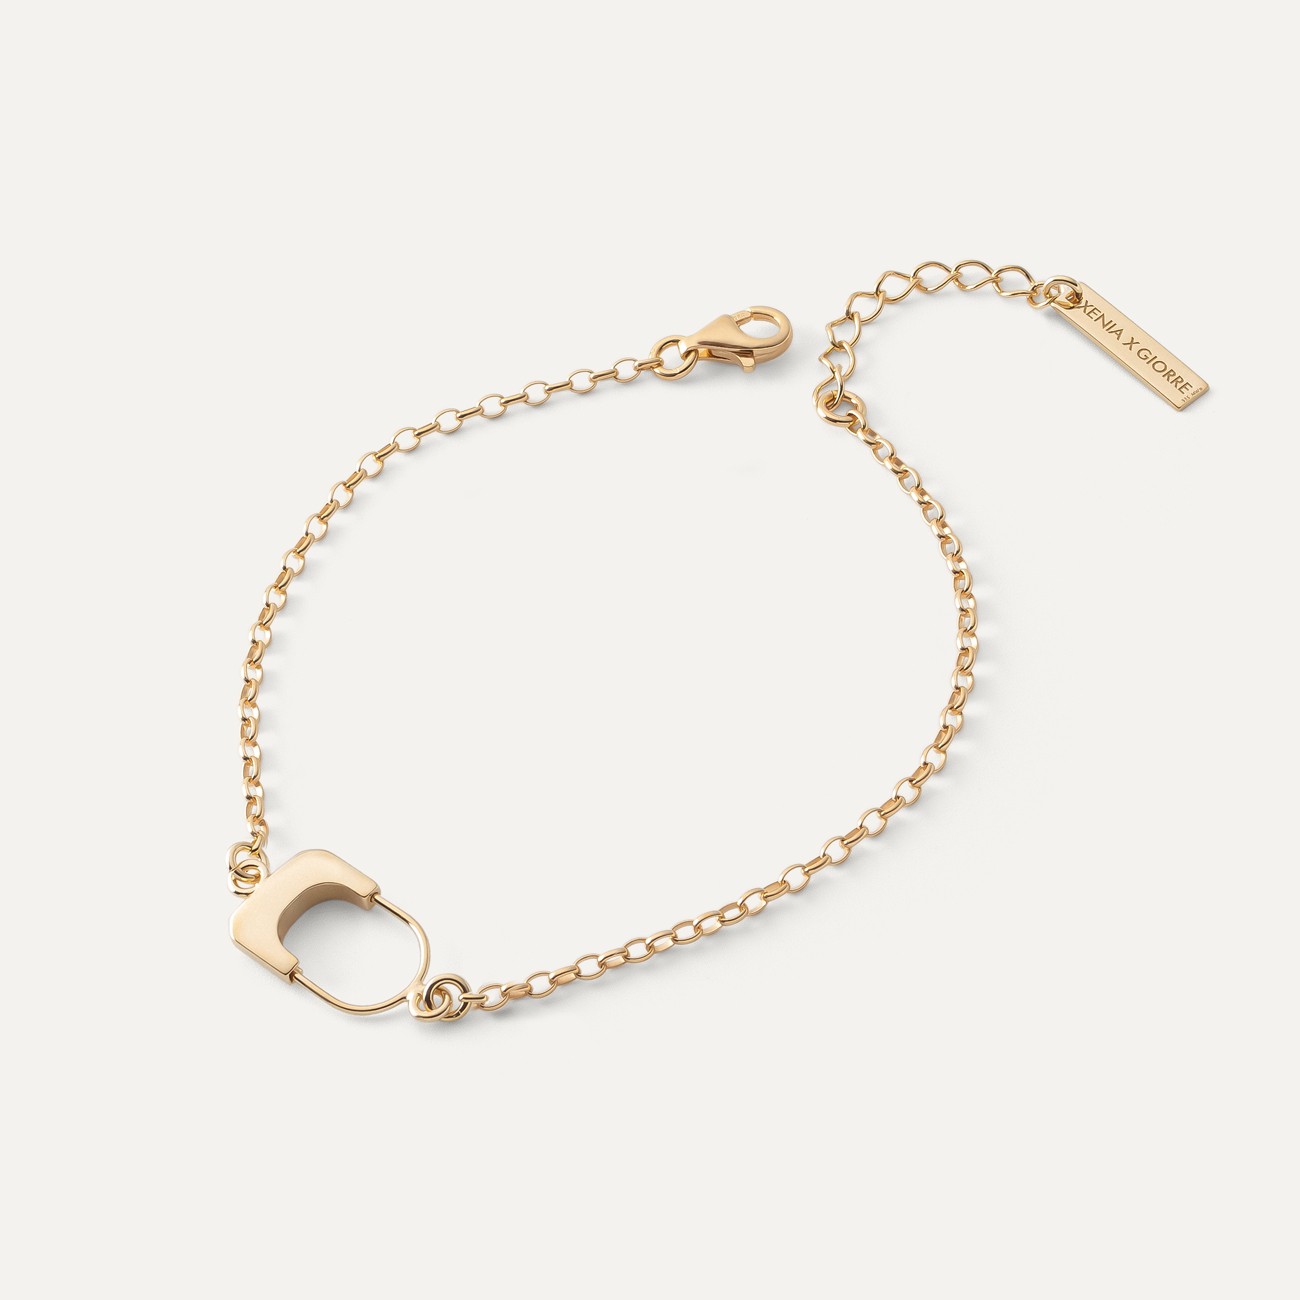 Necklace with padlock, sterling silver 925, XENIA x GIORRE